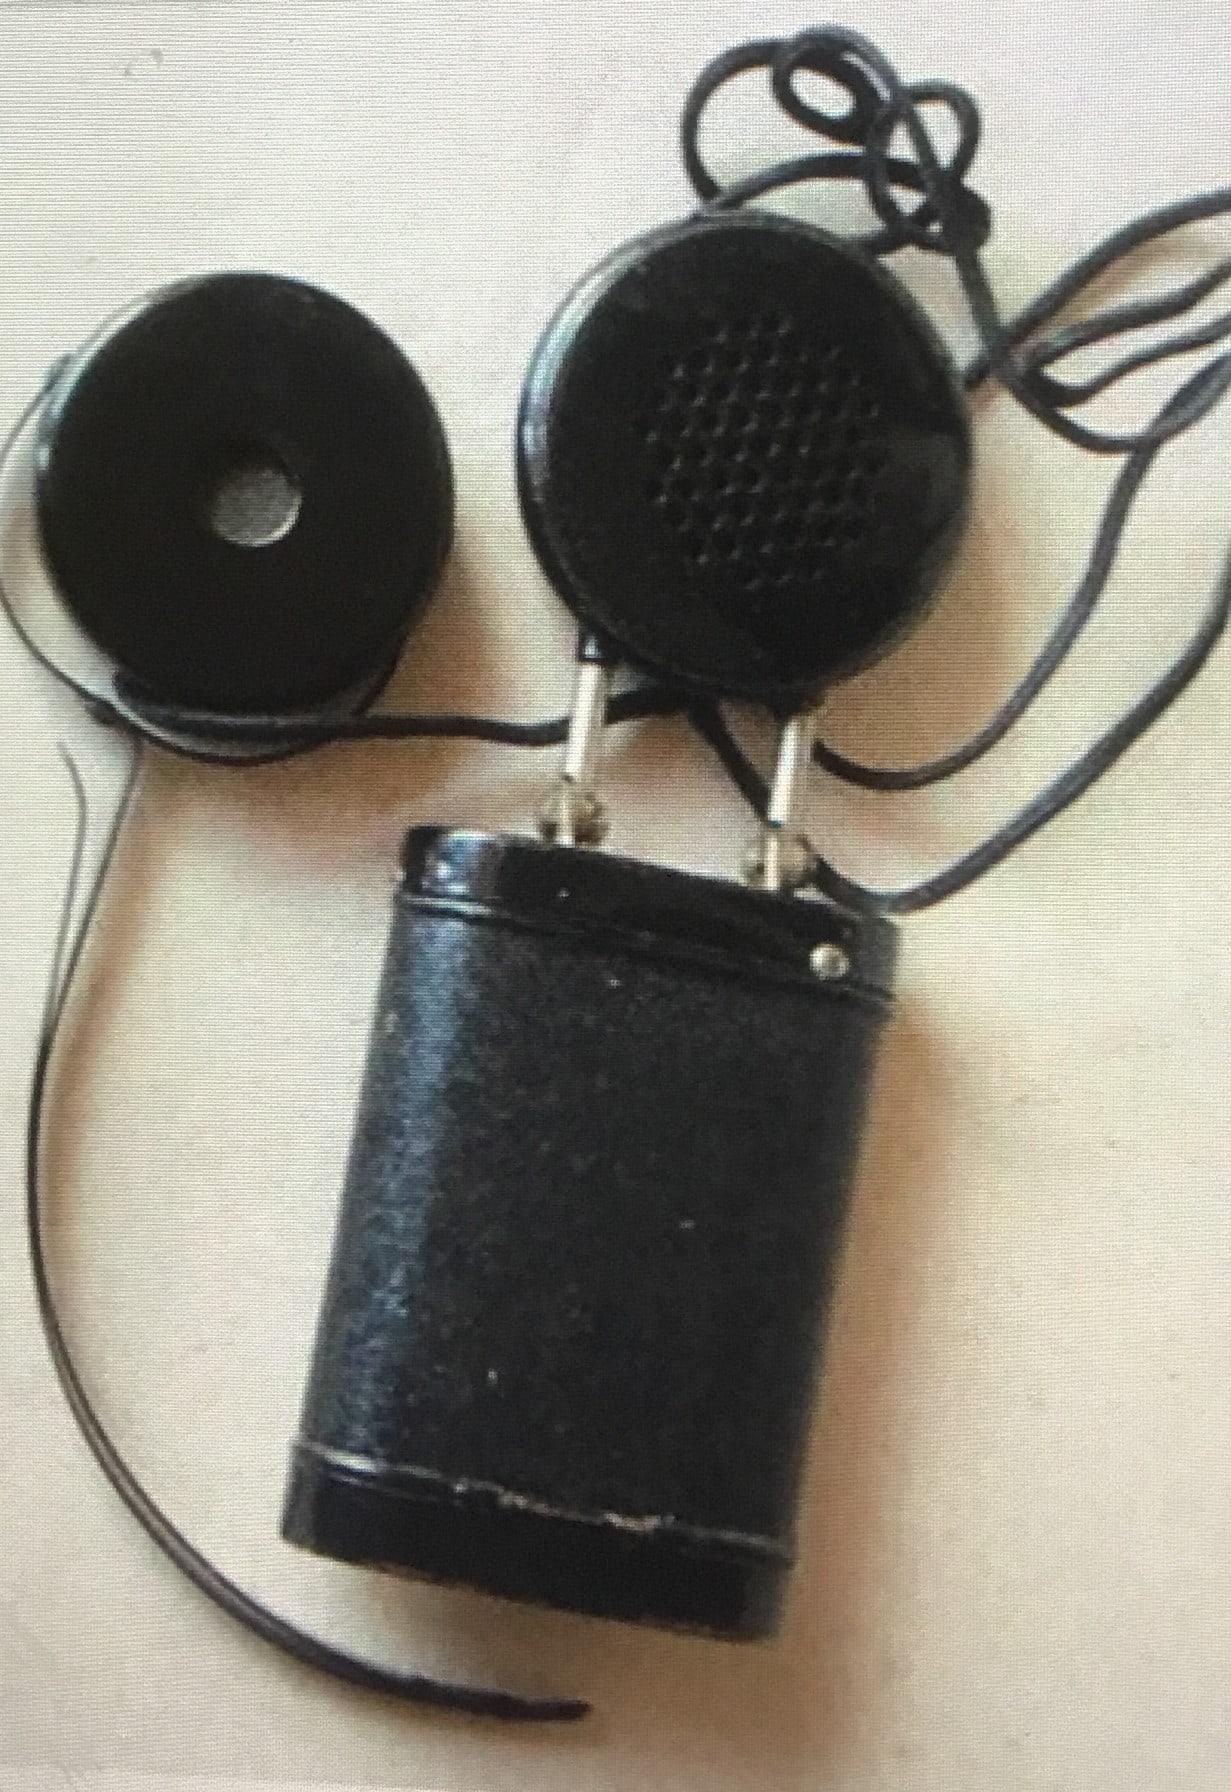 A hearing aid from 1930 - round earpiece connected by wires to a round receiver on a square battery